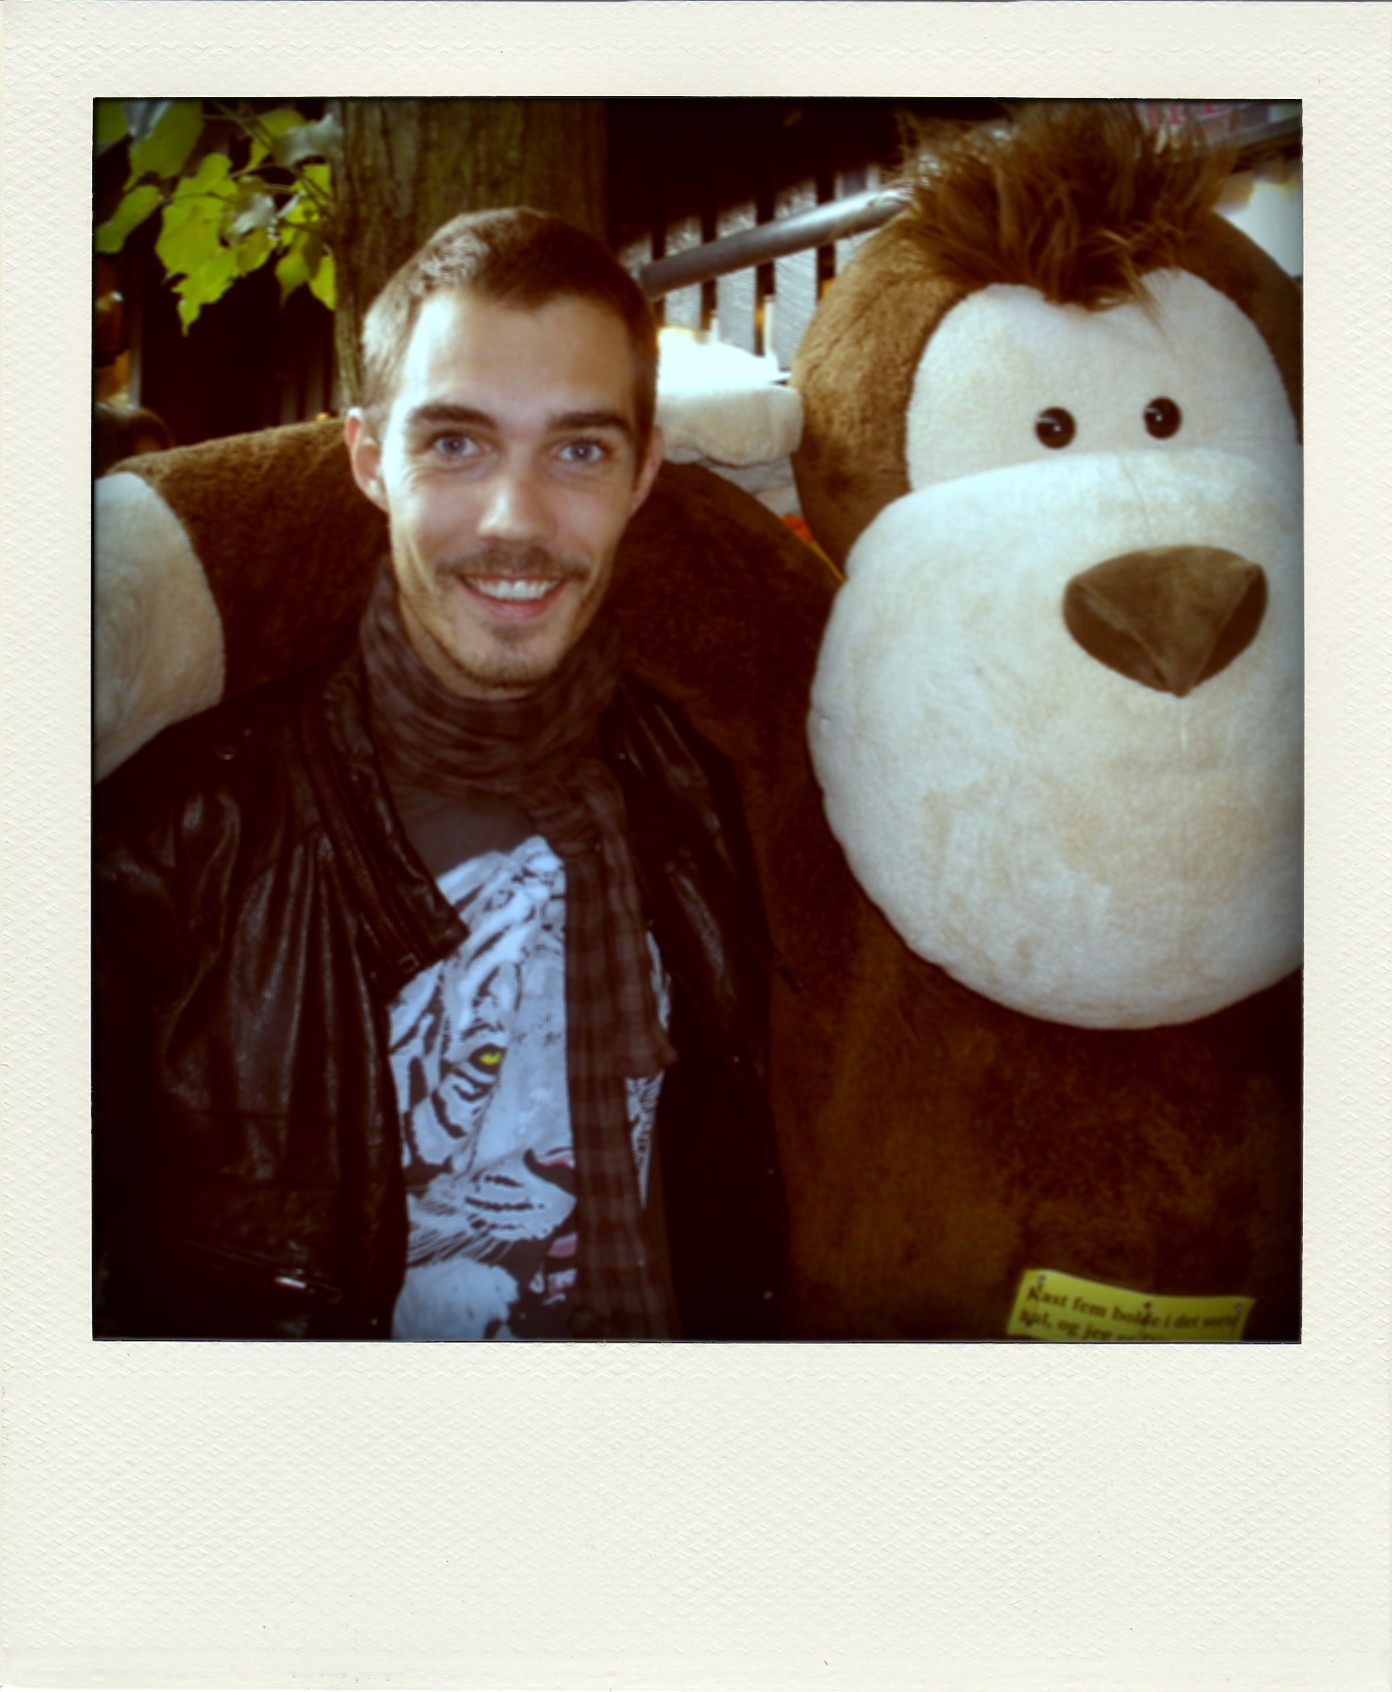 man wearing a jacket and scarf with a huge teddy bear behind him